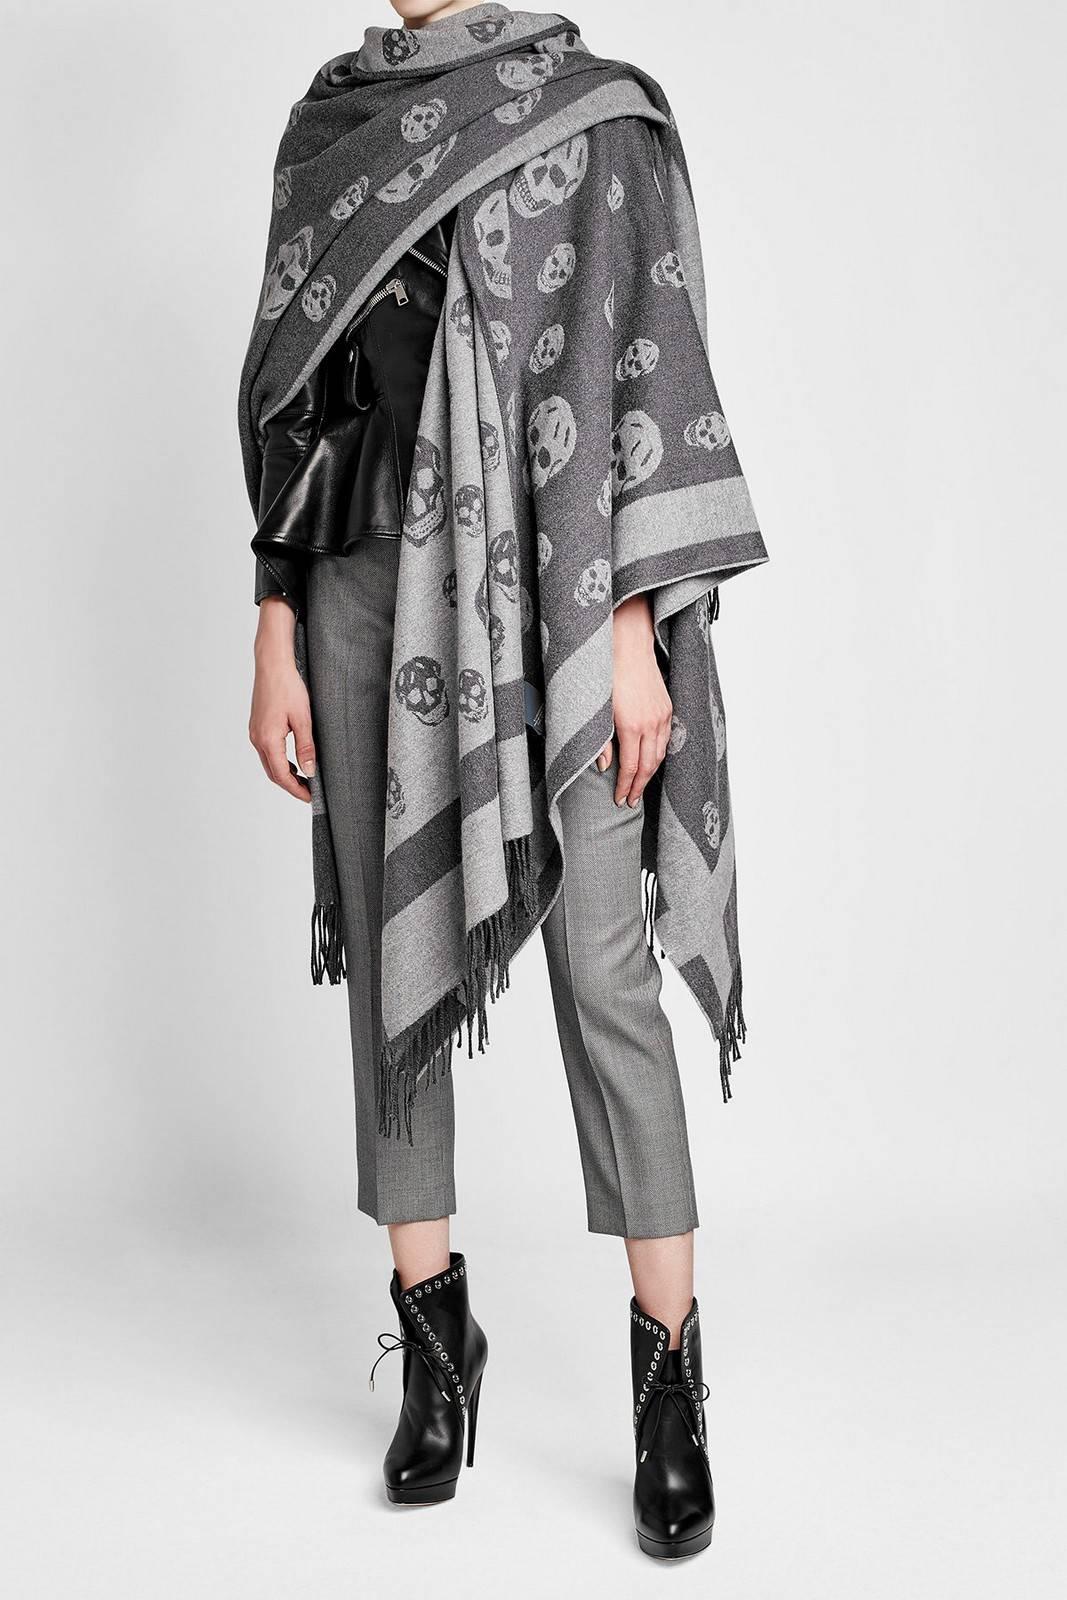 Alexander McQueen Big Skull Cape - Grey
Grey wool and cashmere skull cape. Machine stitched on the long sides and fringes on the short. Features repeat skull pattern and skull border.

96% Wool, 4% Cashmere.
Dry clean